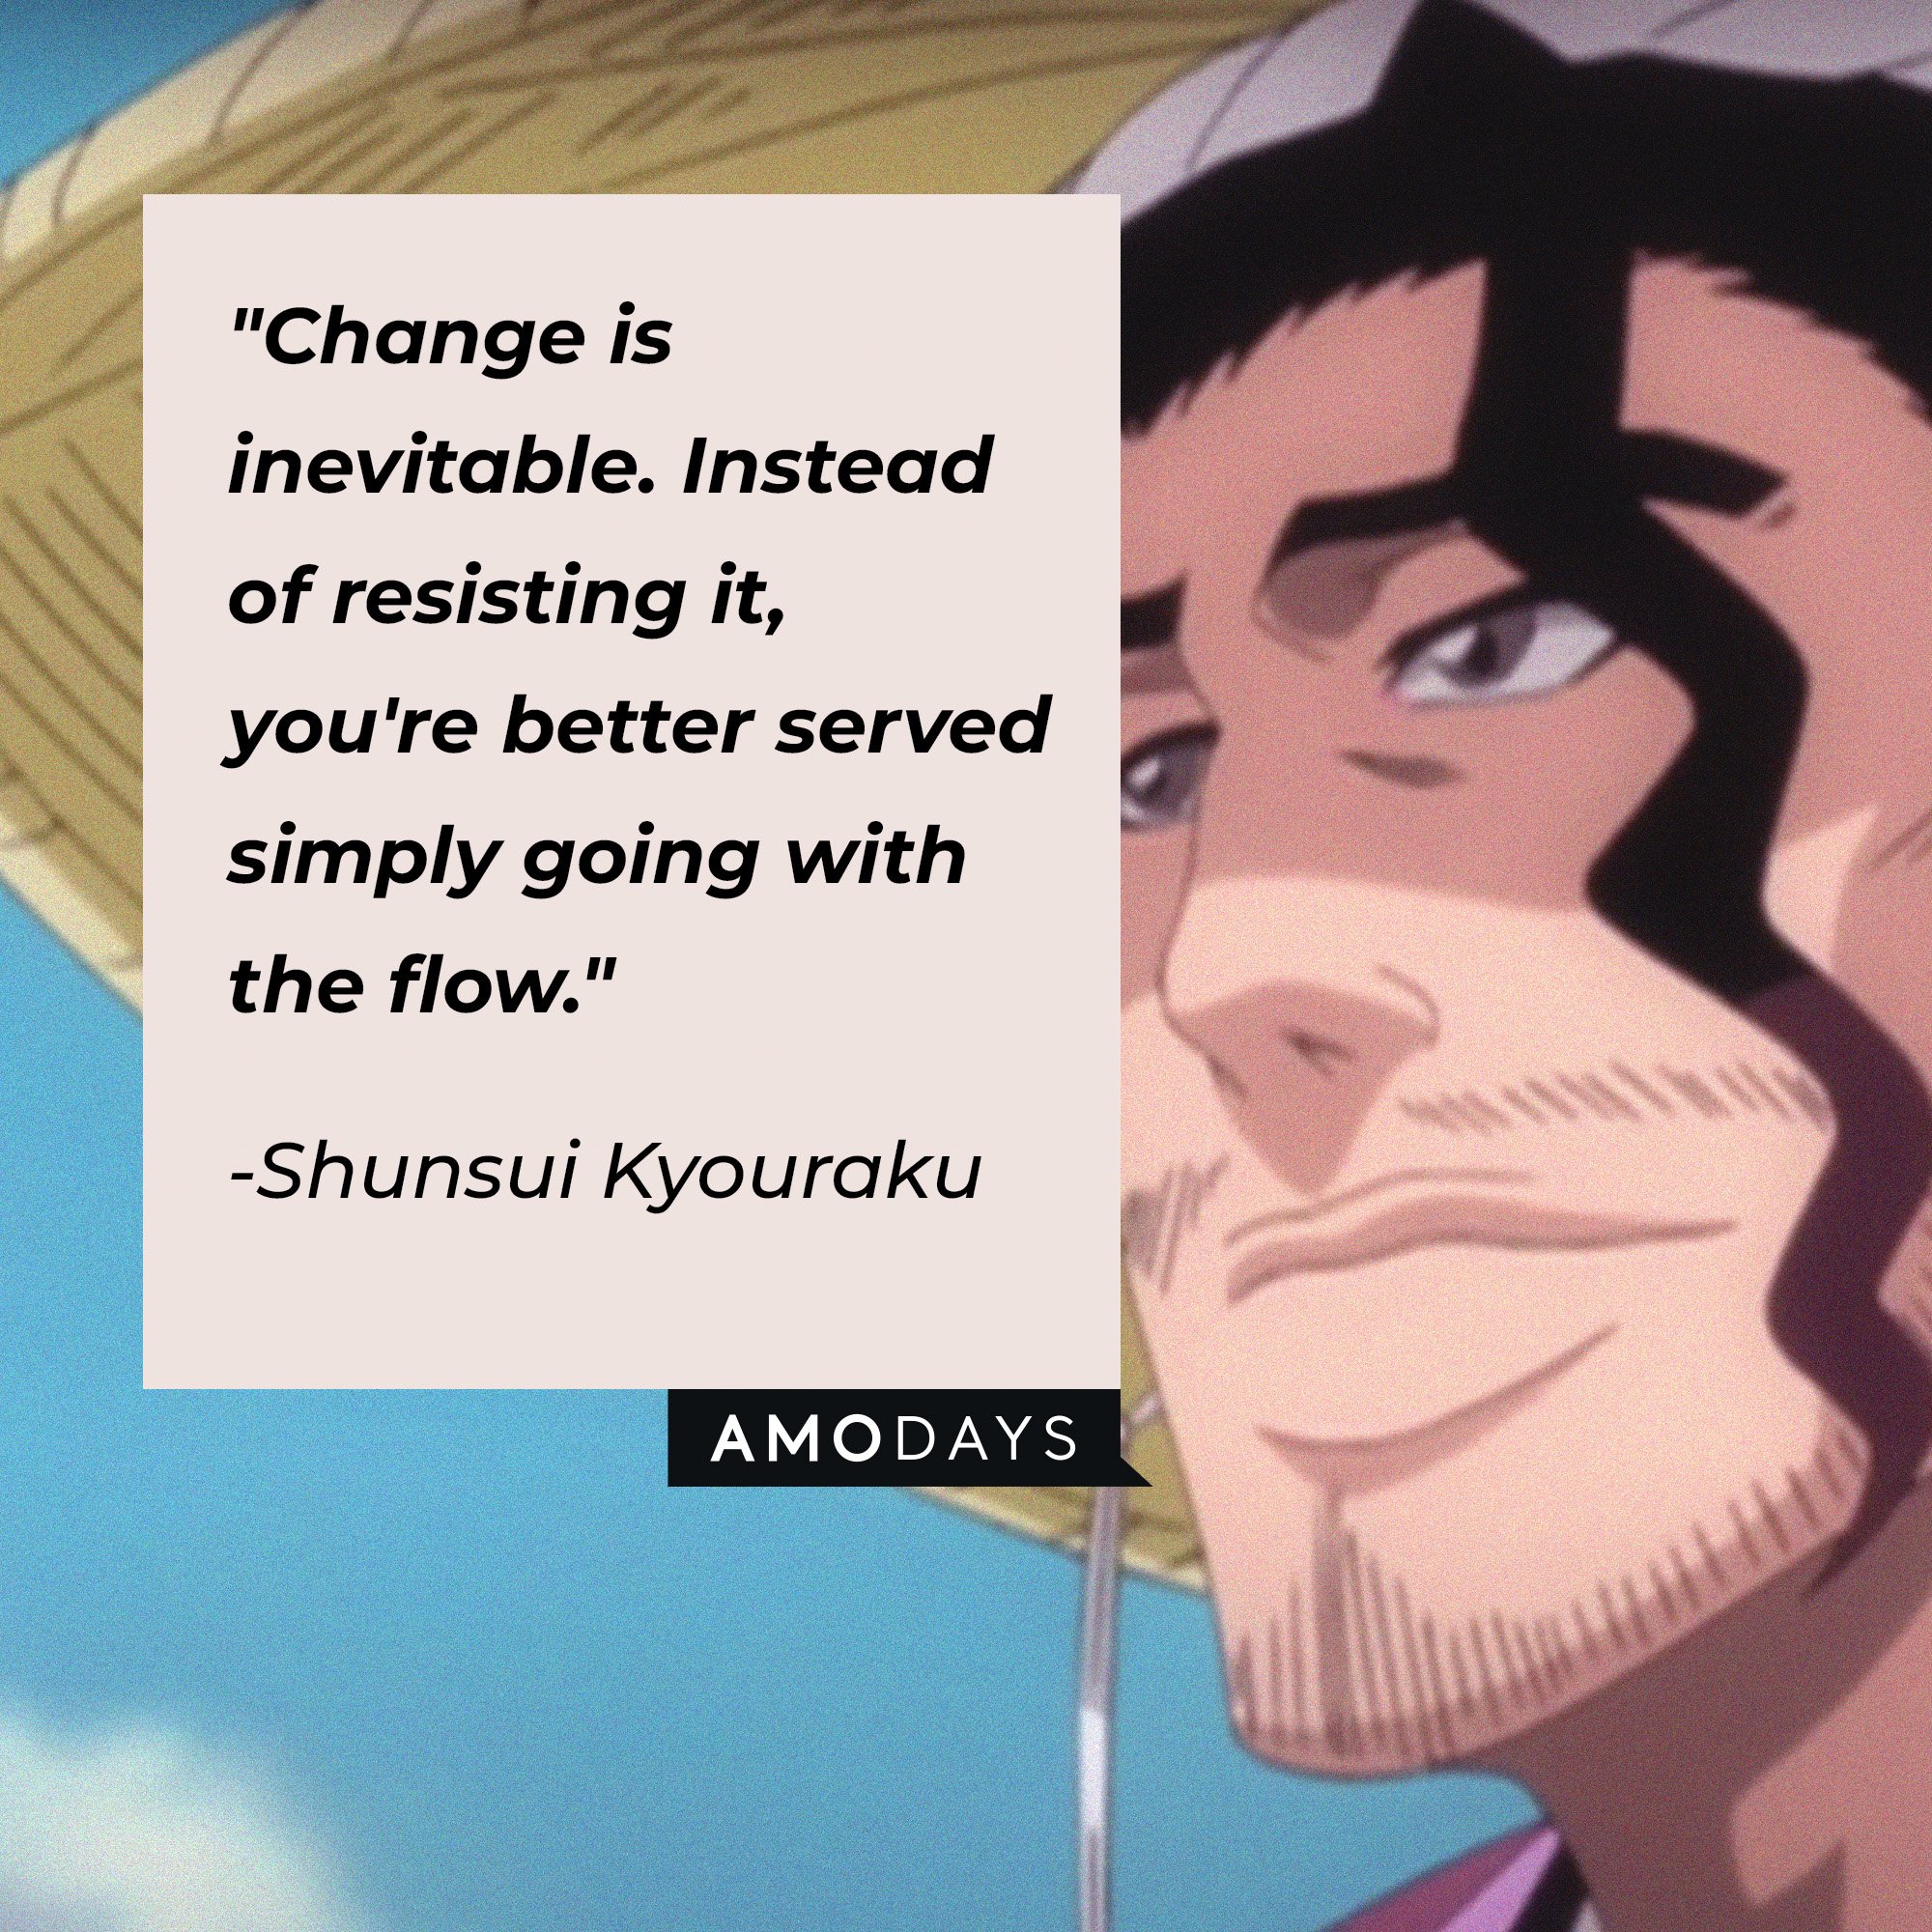 Shunsui Kyouraku’s quote: "Change is inevitable. Instead of resisting it, you're better served simply going with the flow." | Image: AmoDays